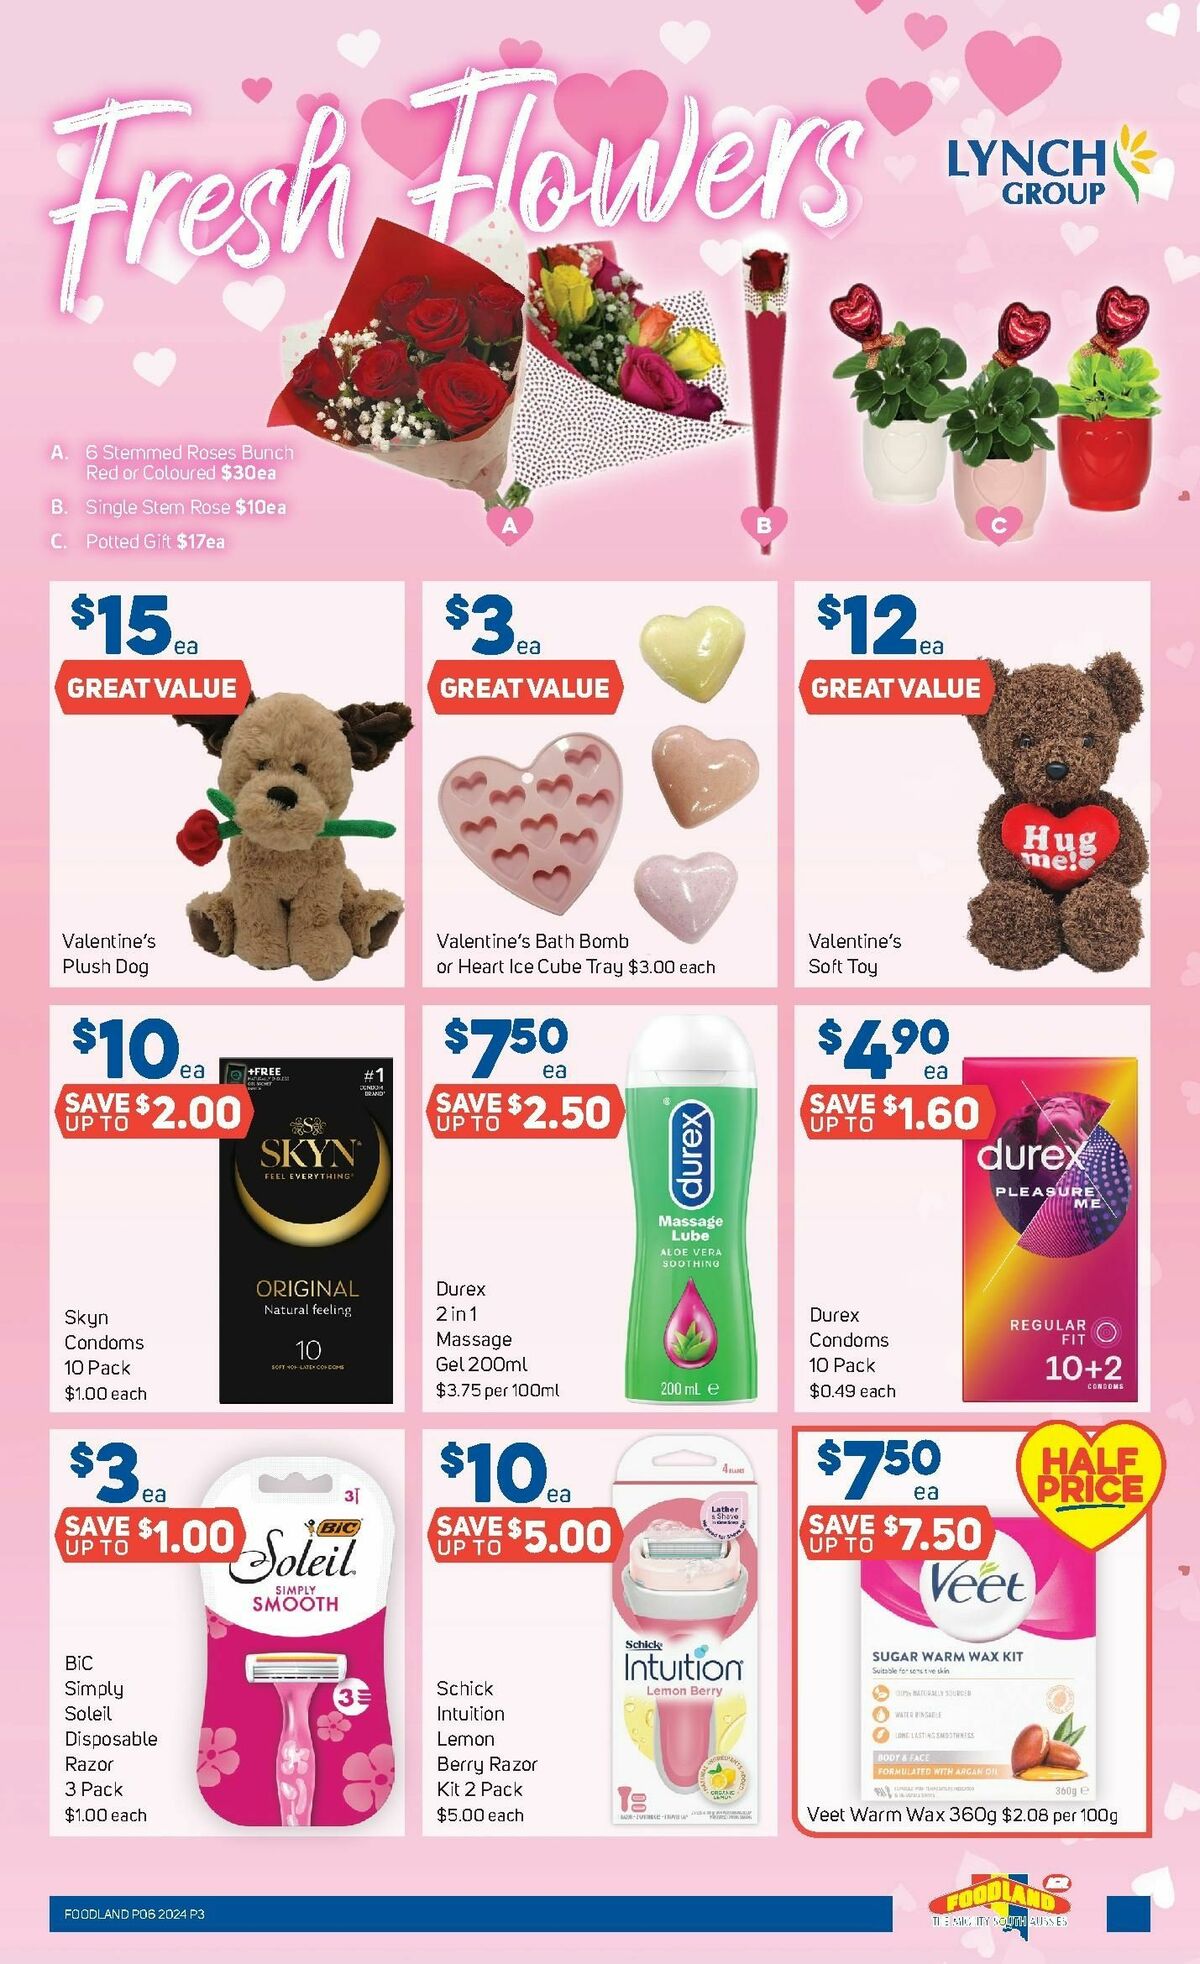 Foodland Catalogues from 7 February